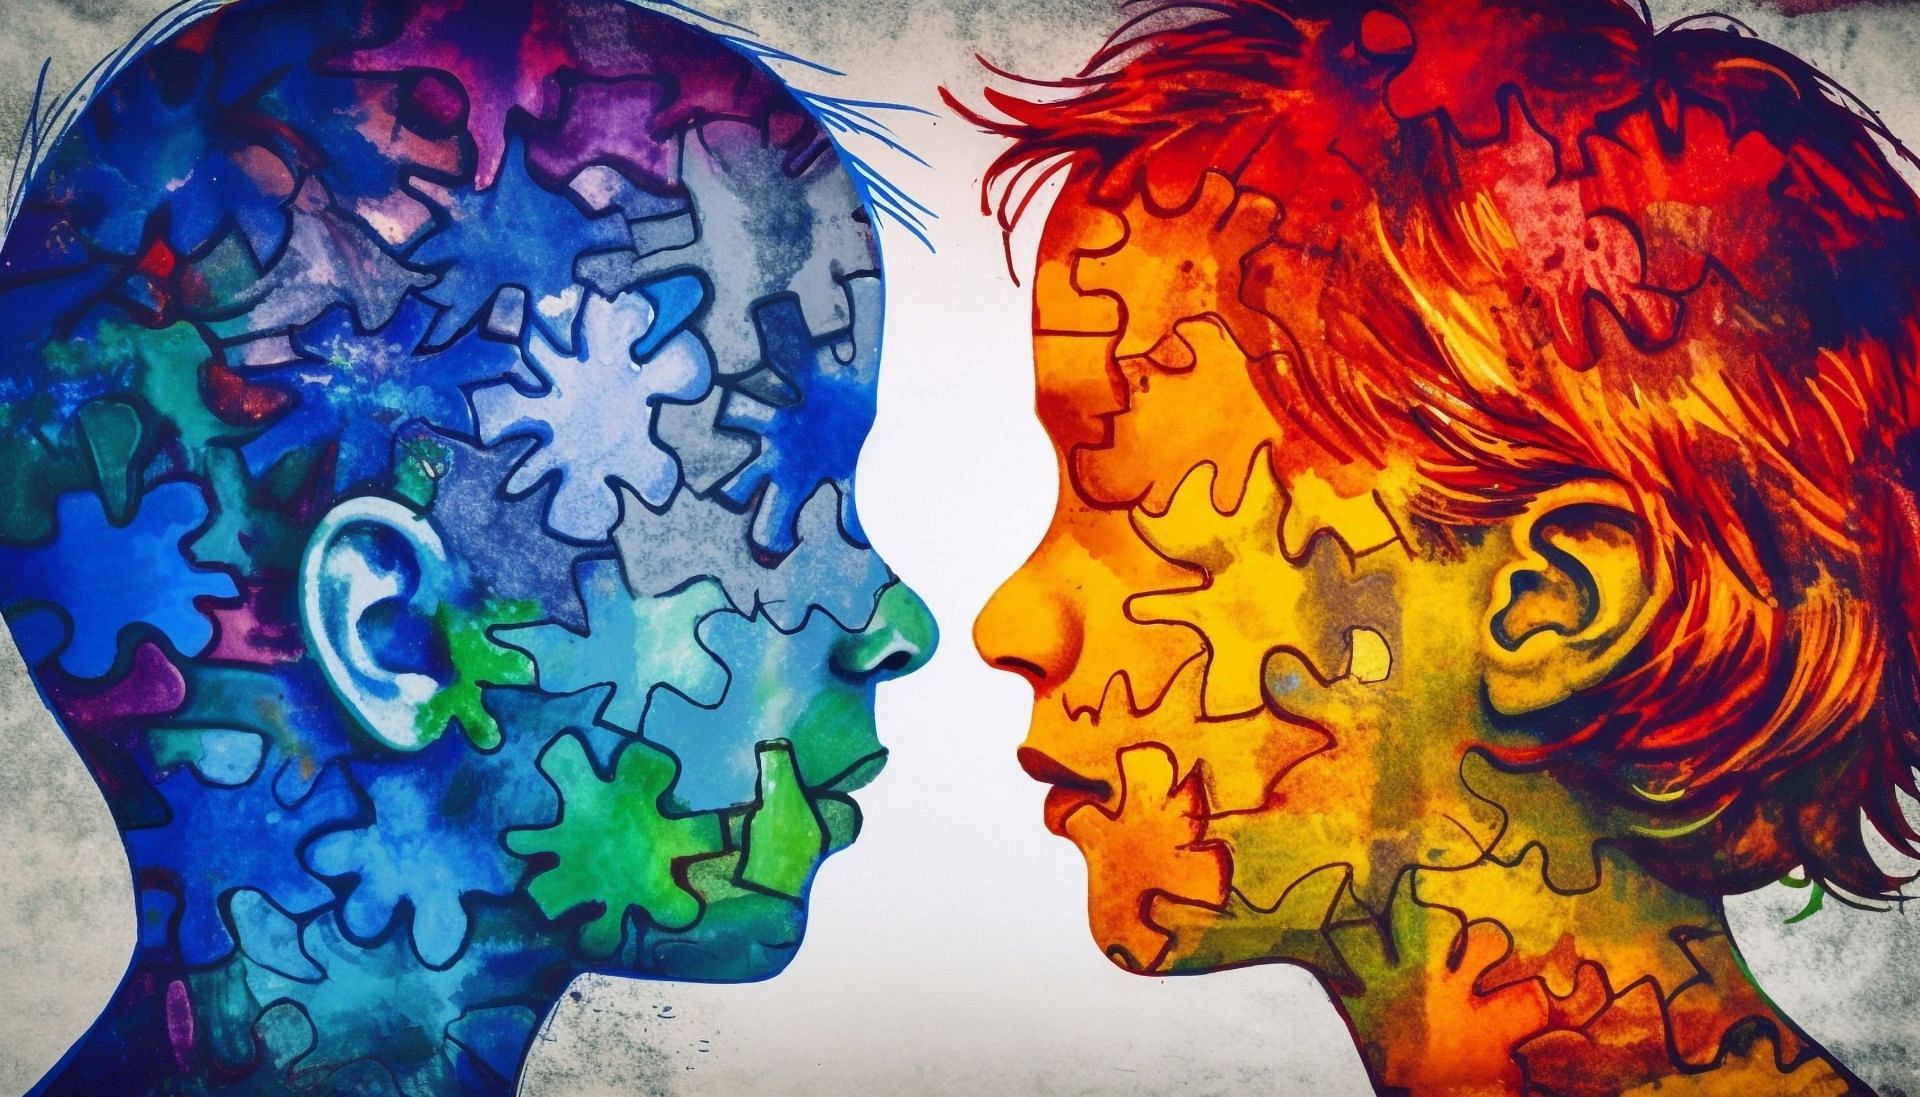 Language is the basis of our connection, what happens when it becomes lost? It leads to language processing disorder. (Image via Freepik/ Vecstock)